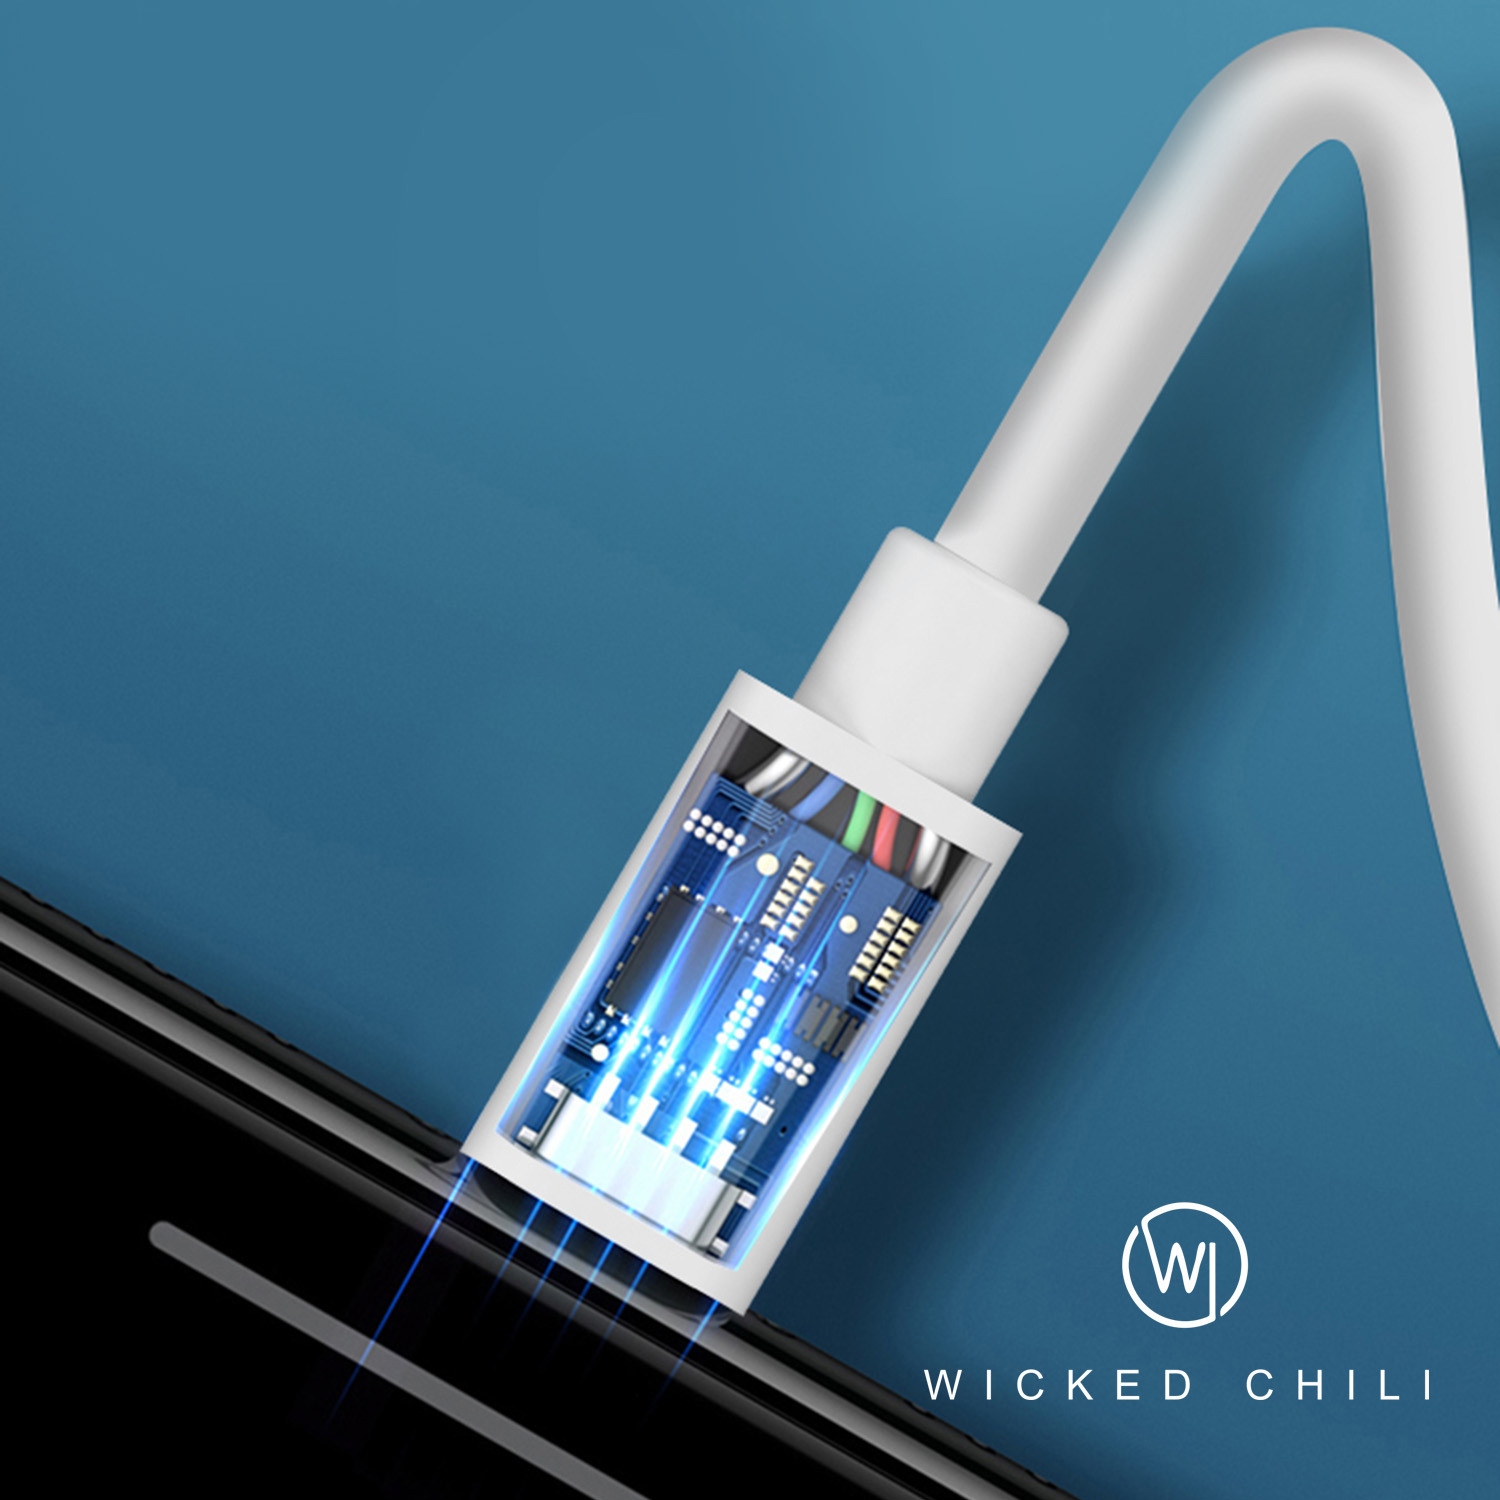 WICKED CHILI 1m Ladekabel, Datenkabel 1 Mini), 12 XS, 11, 14, XR, 8, Fast Charge Made SE, for m, iPad, 13, auf Kabel, Max, (Pro, USB-C Lightning X, iPhone weiss